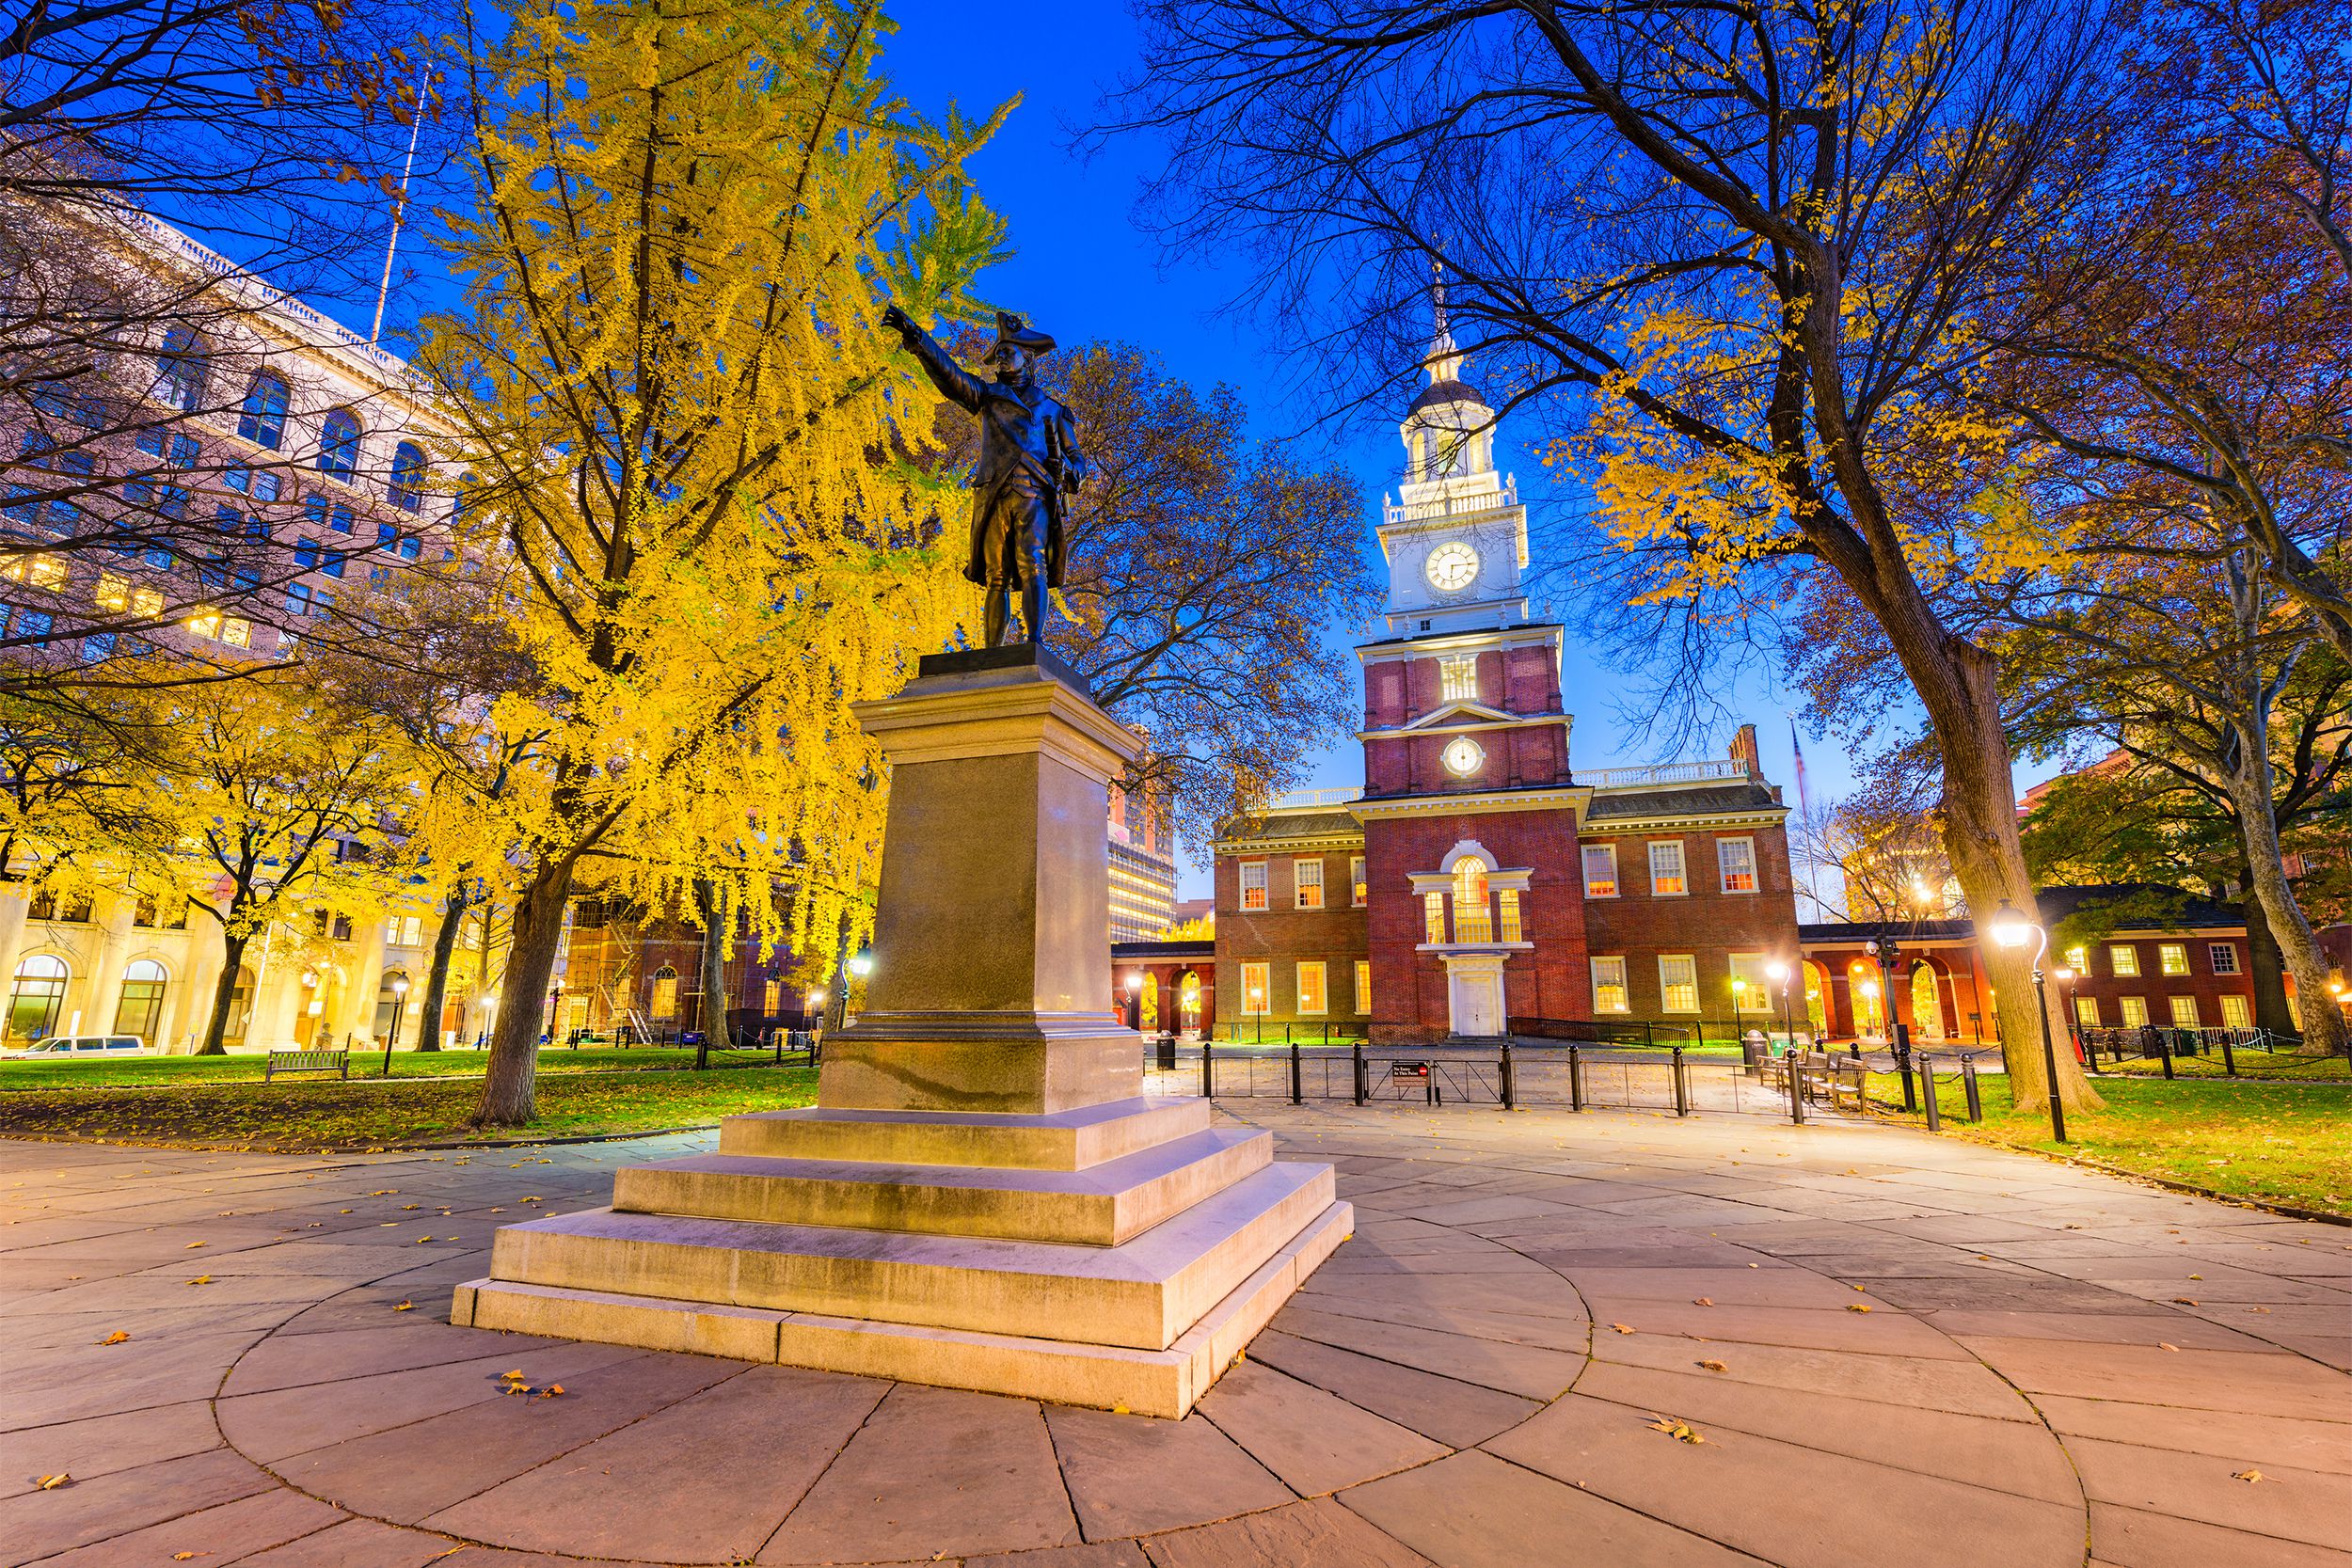 <p>Not only is this famous Philadelphia site home to the iconic Liberty Bell (which was named by abolitionists fighting slavery), it is also home to Independence Hall, where the Declaration of Independence and U.S. Constitution were debated and ratified in the late 1700s. Doesn't get much more patriotic than that.</p>